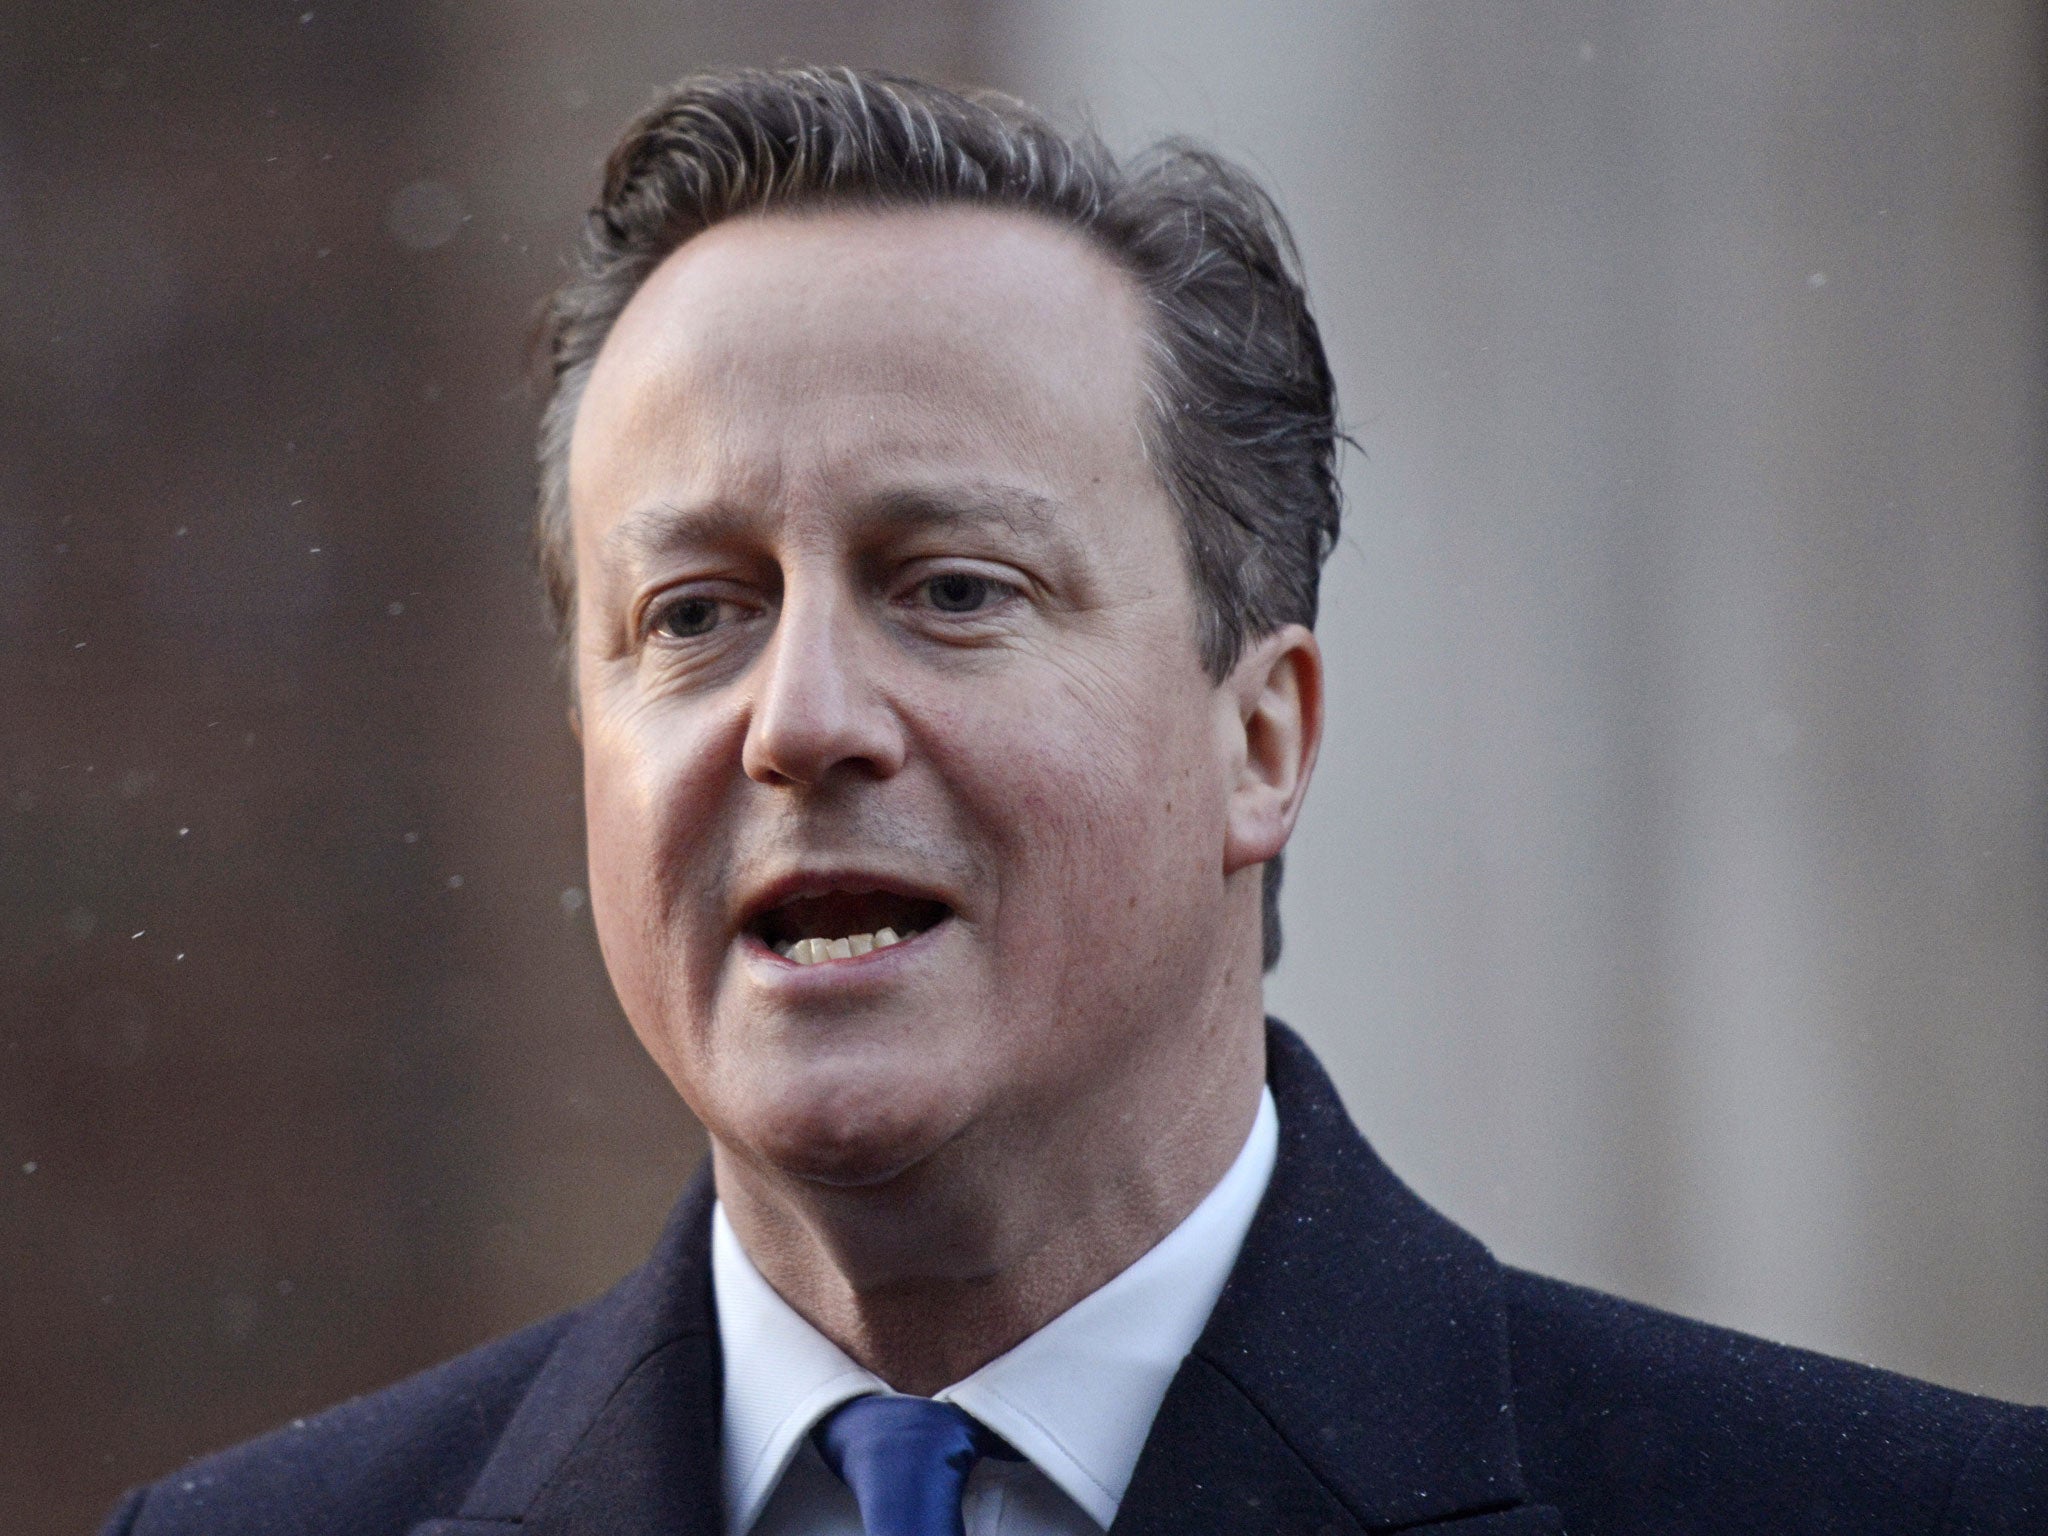 Cameron is due to say: "We need a strong London, but we need a northern powerhouse too"